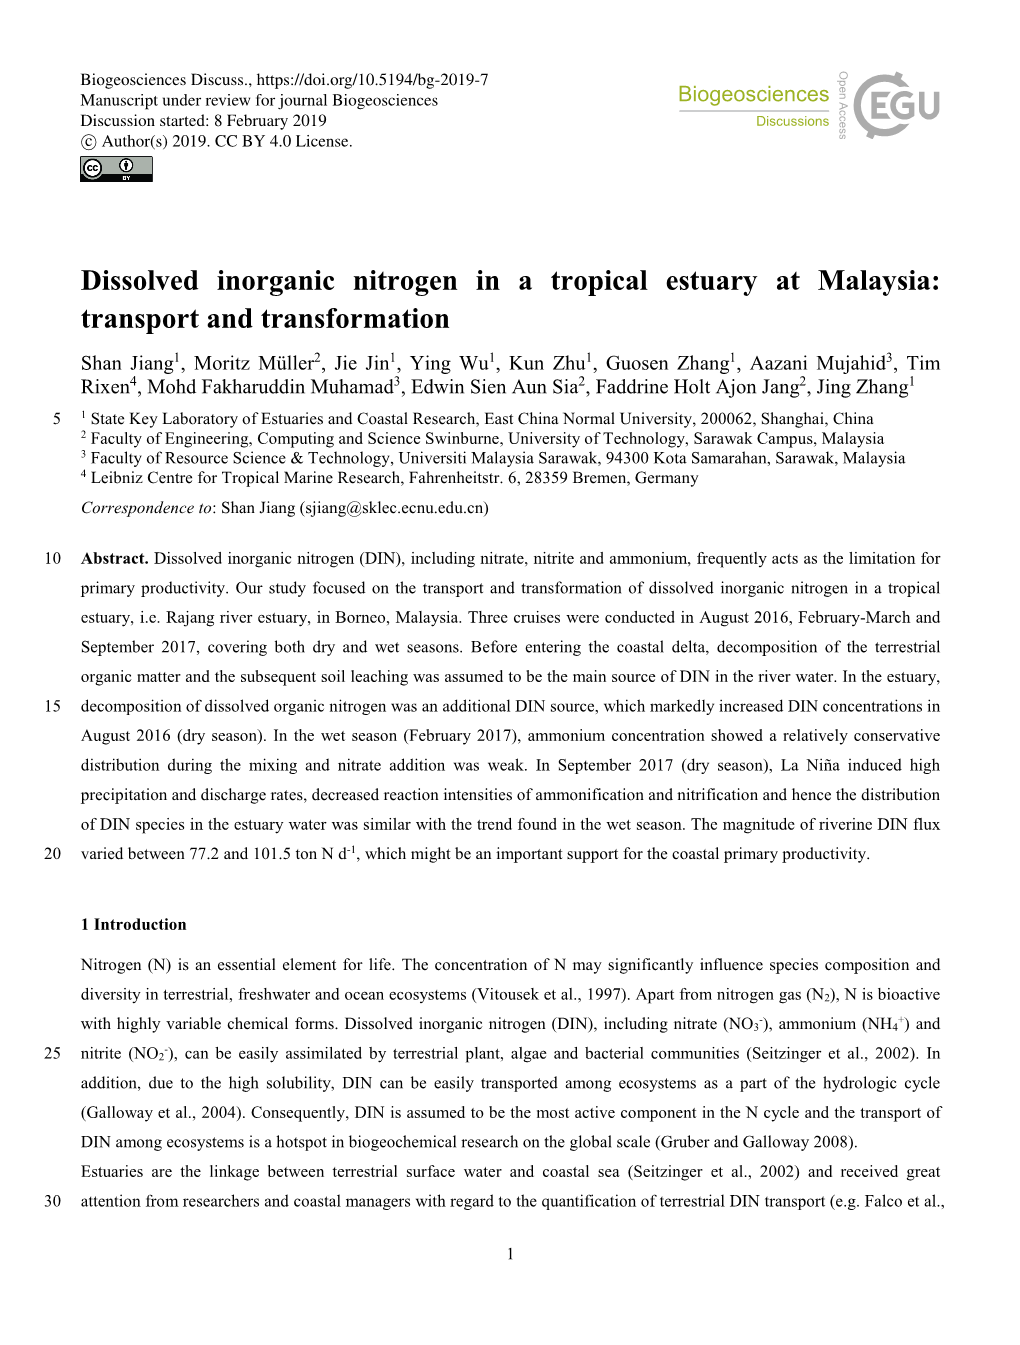 Dissolved Inorganic Nitrogen in a Tropical Estuary at Malaysia